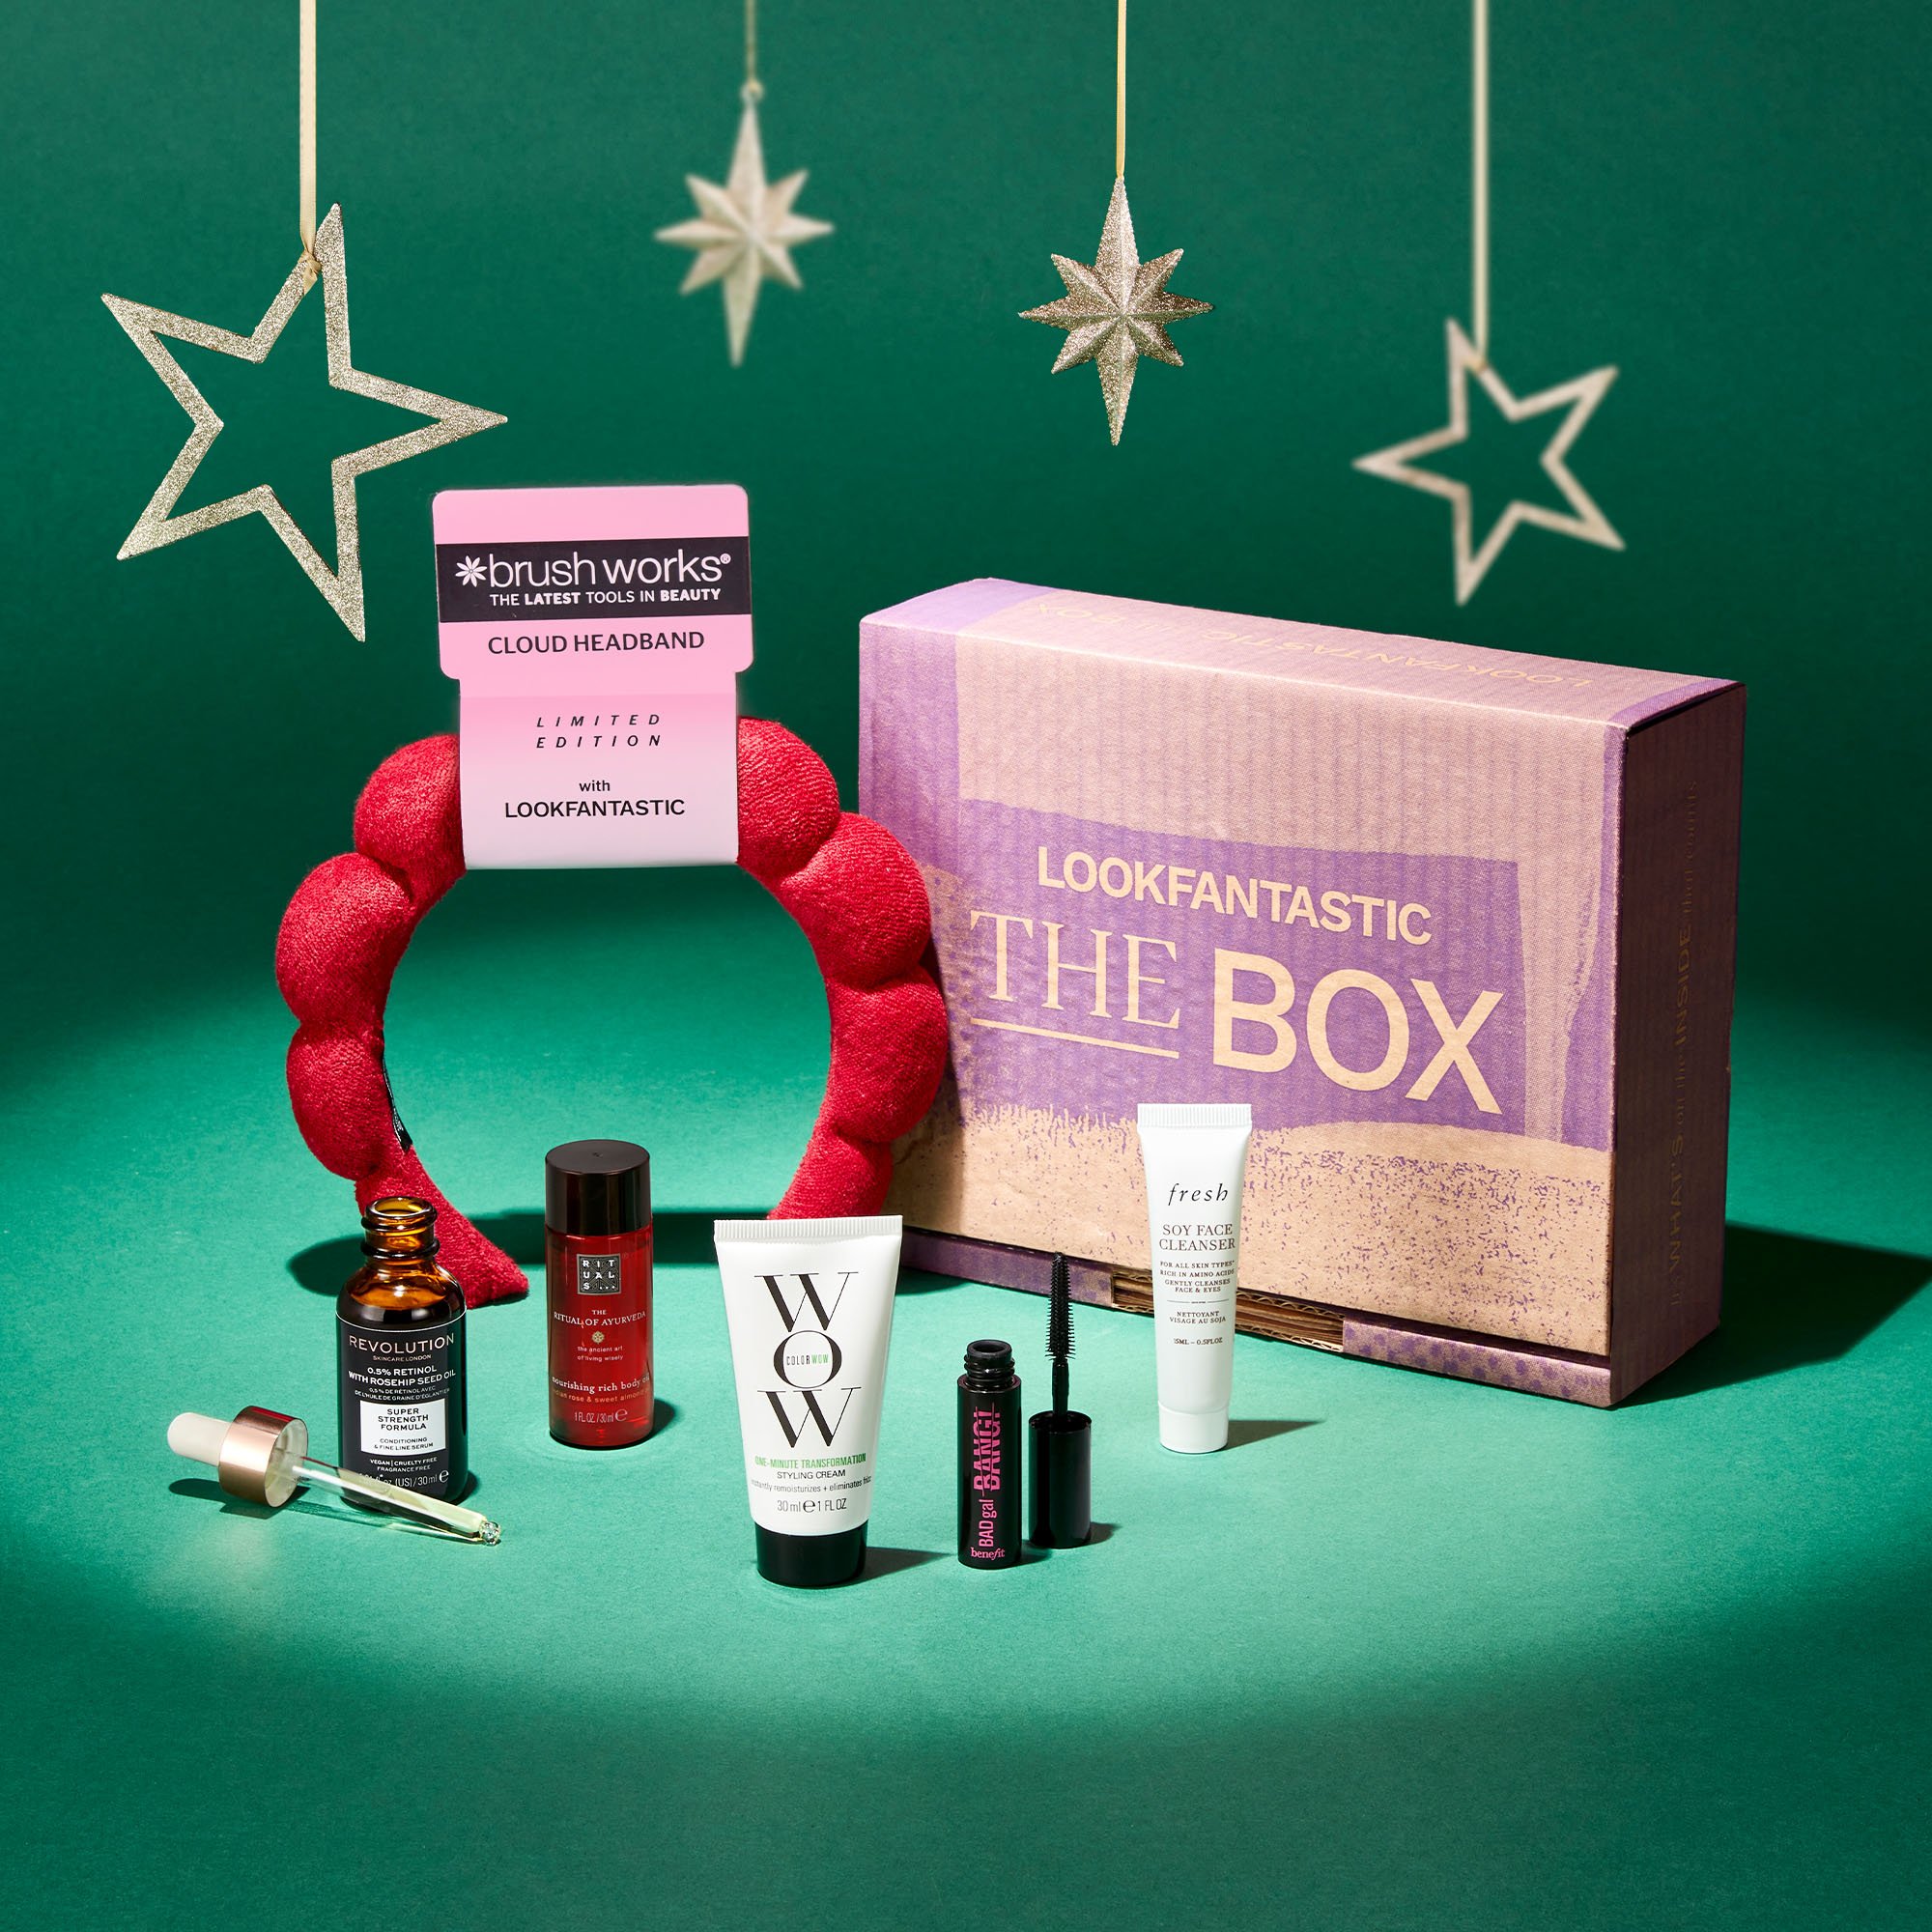 Here’s why you should subscribe to LOOKFANTASTIC THE BOX